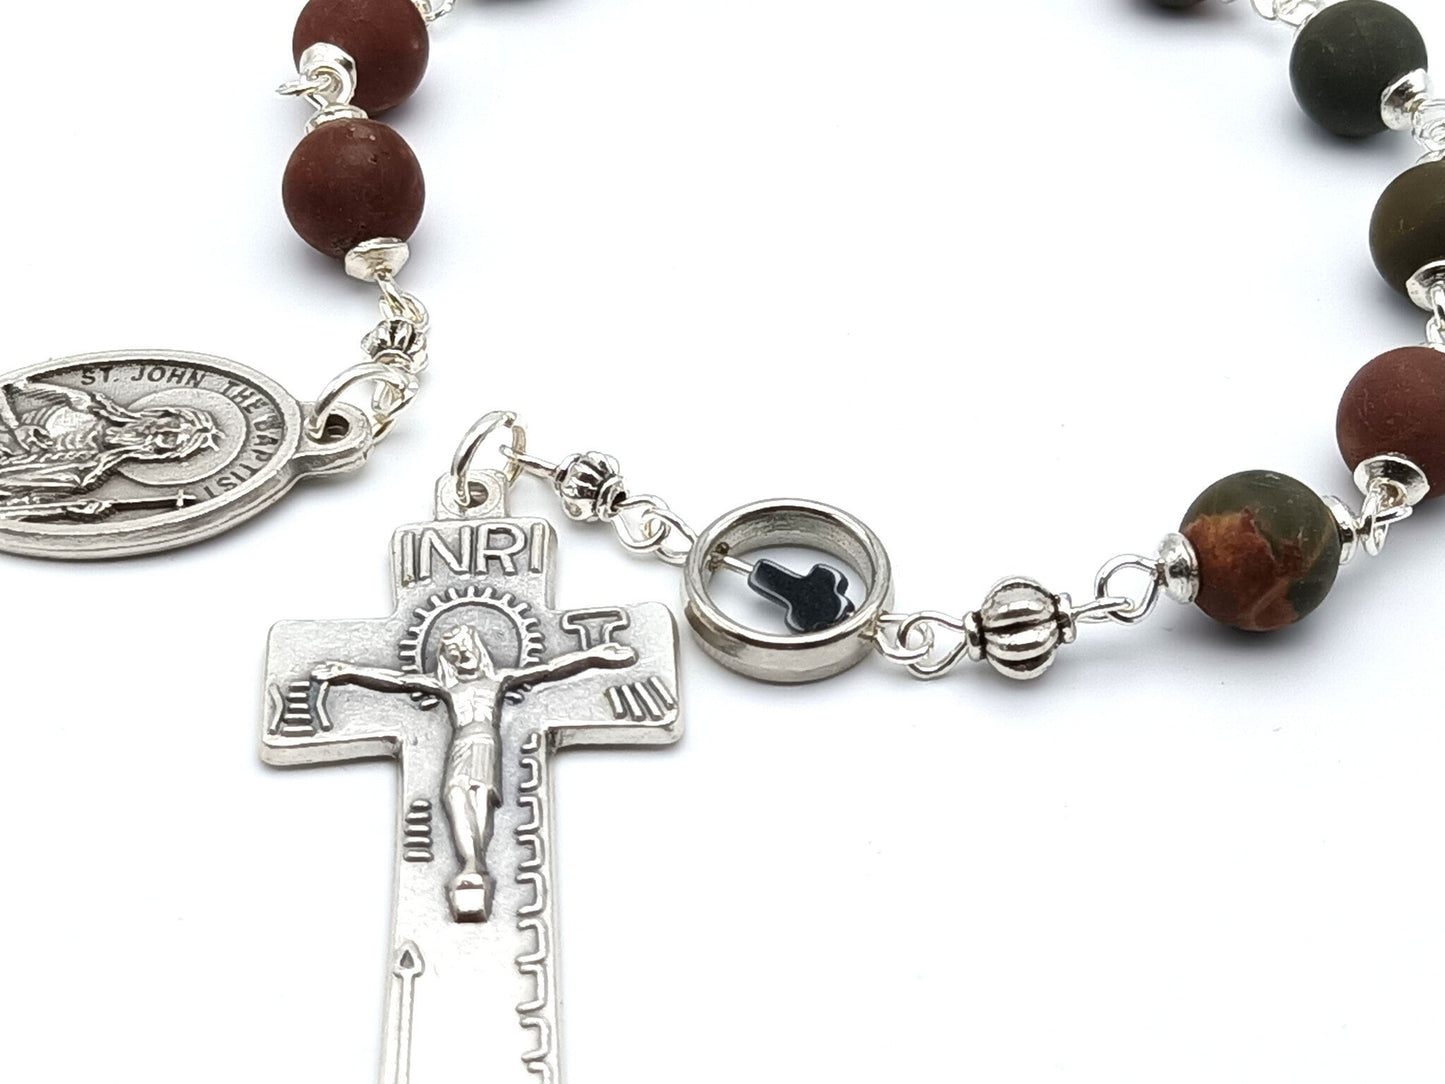 Saint John the Baptist unique rosary beads single decade or tenner rosary with gemstone beads, silver cross pater bead, penal crucifix and end medal.